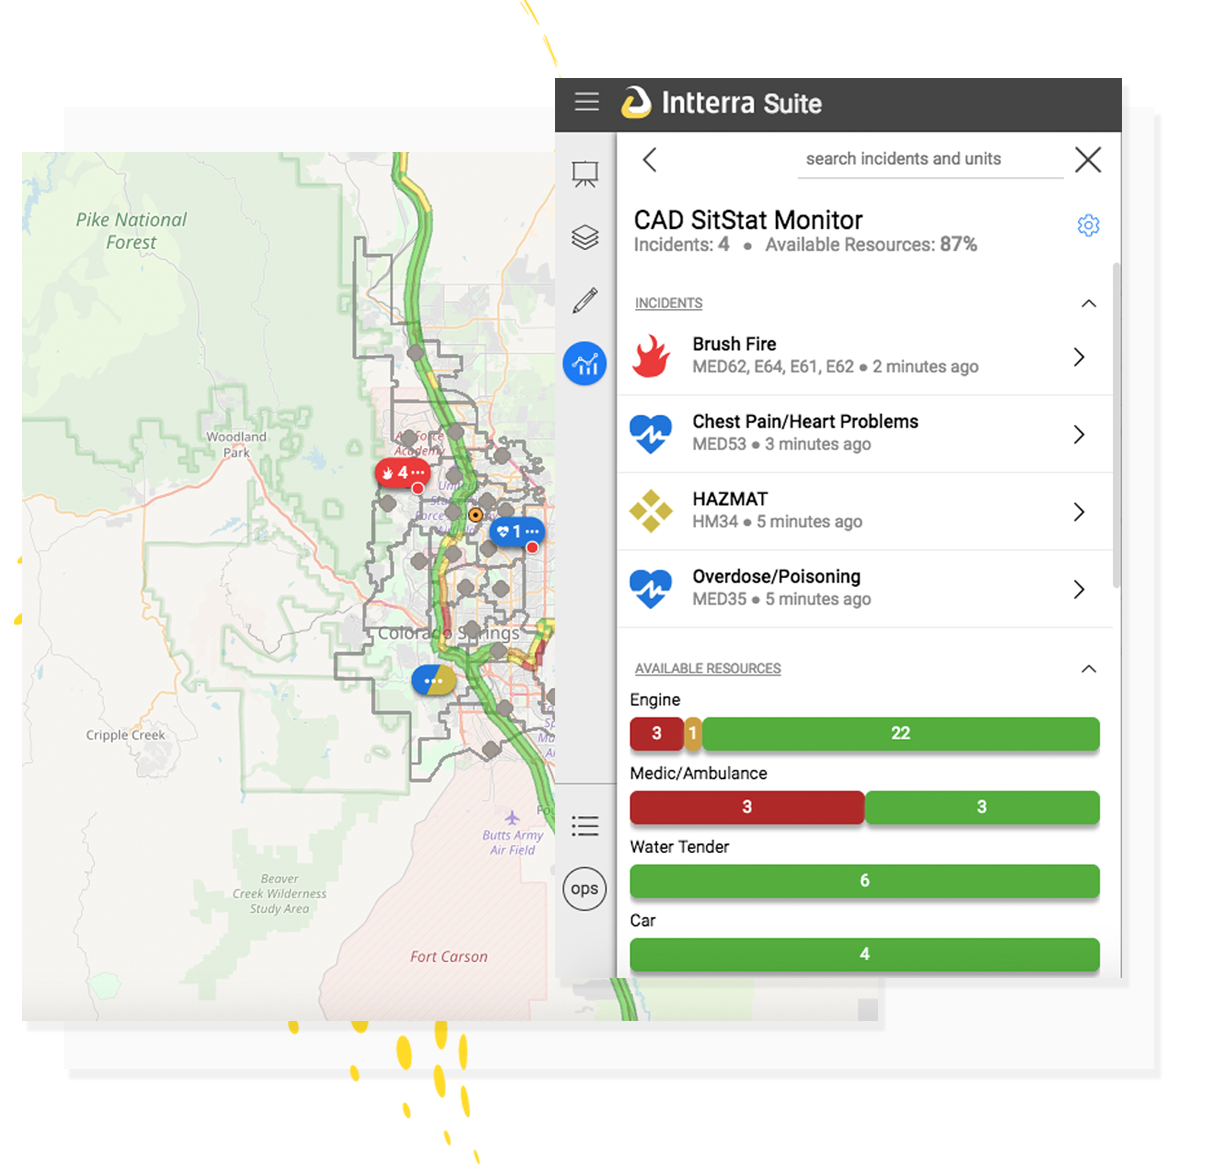 Intterra Incident Management software provides a common operating picture allowing everyone to view and contribute intel as they get it.